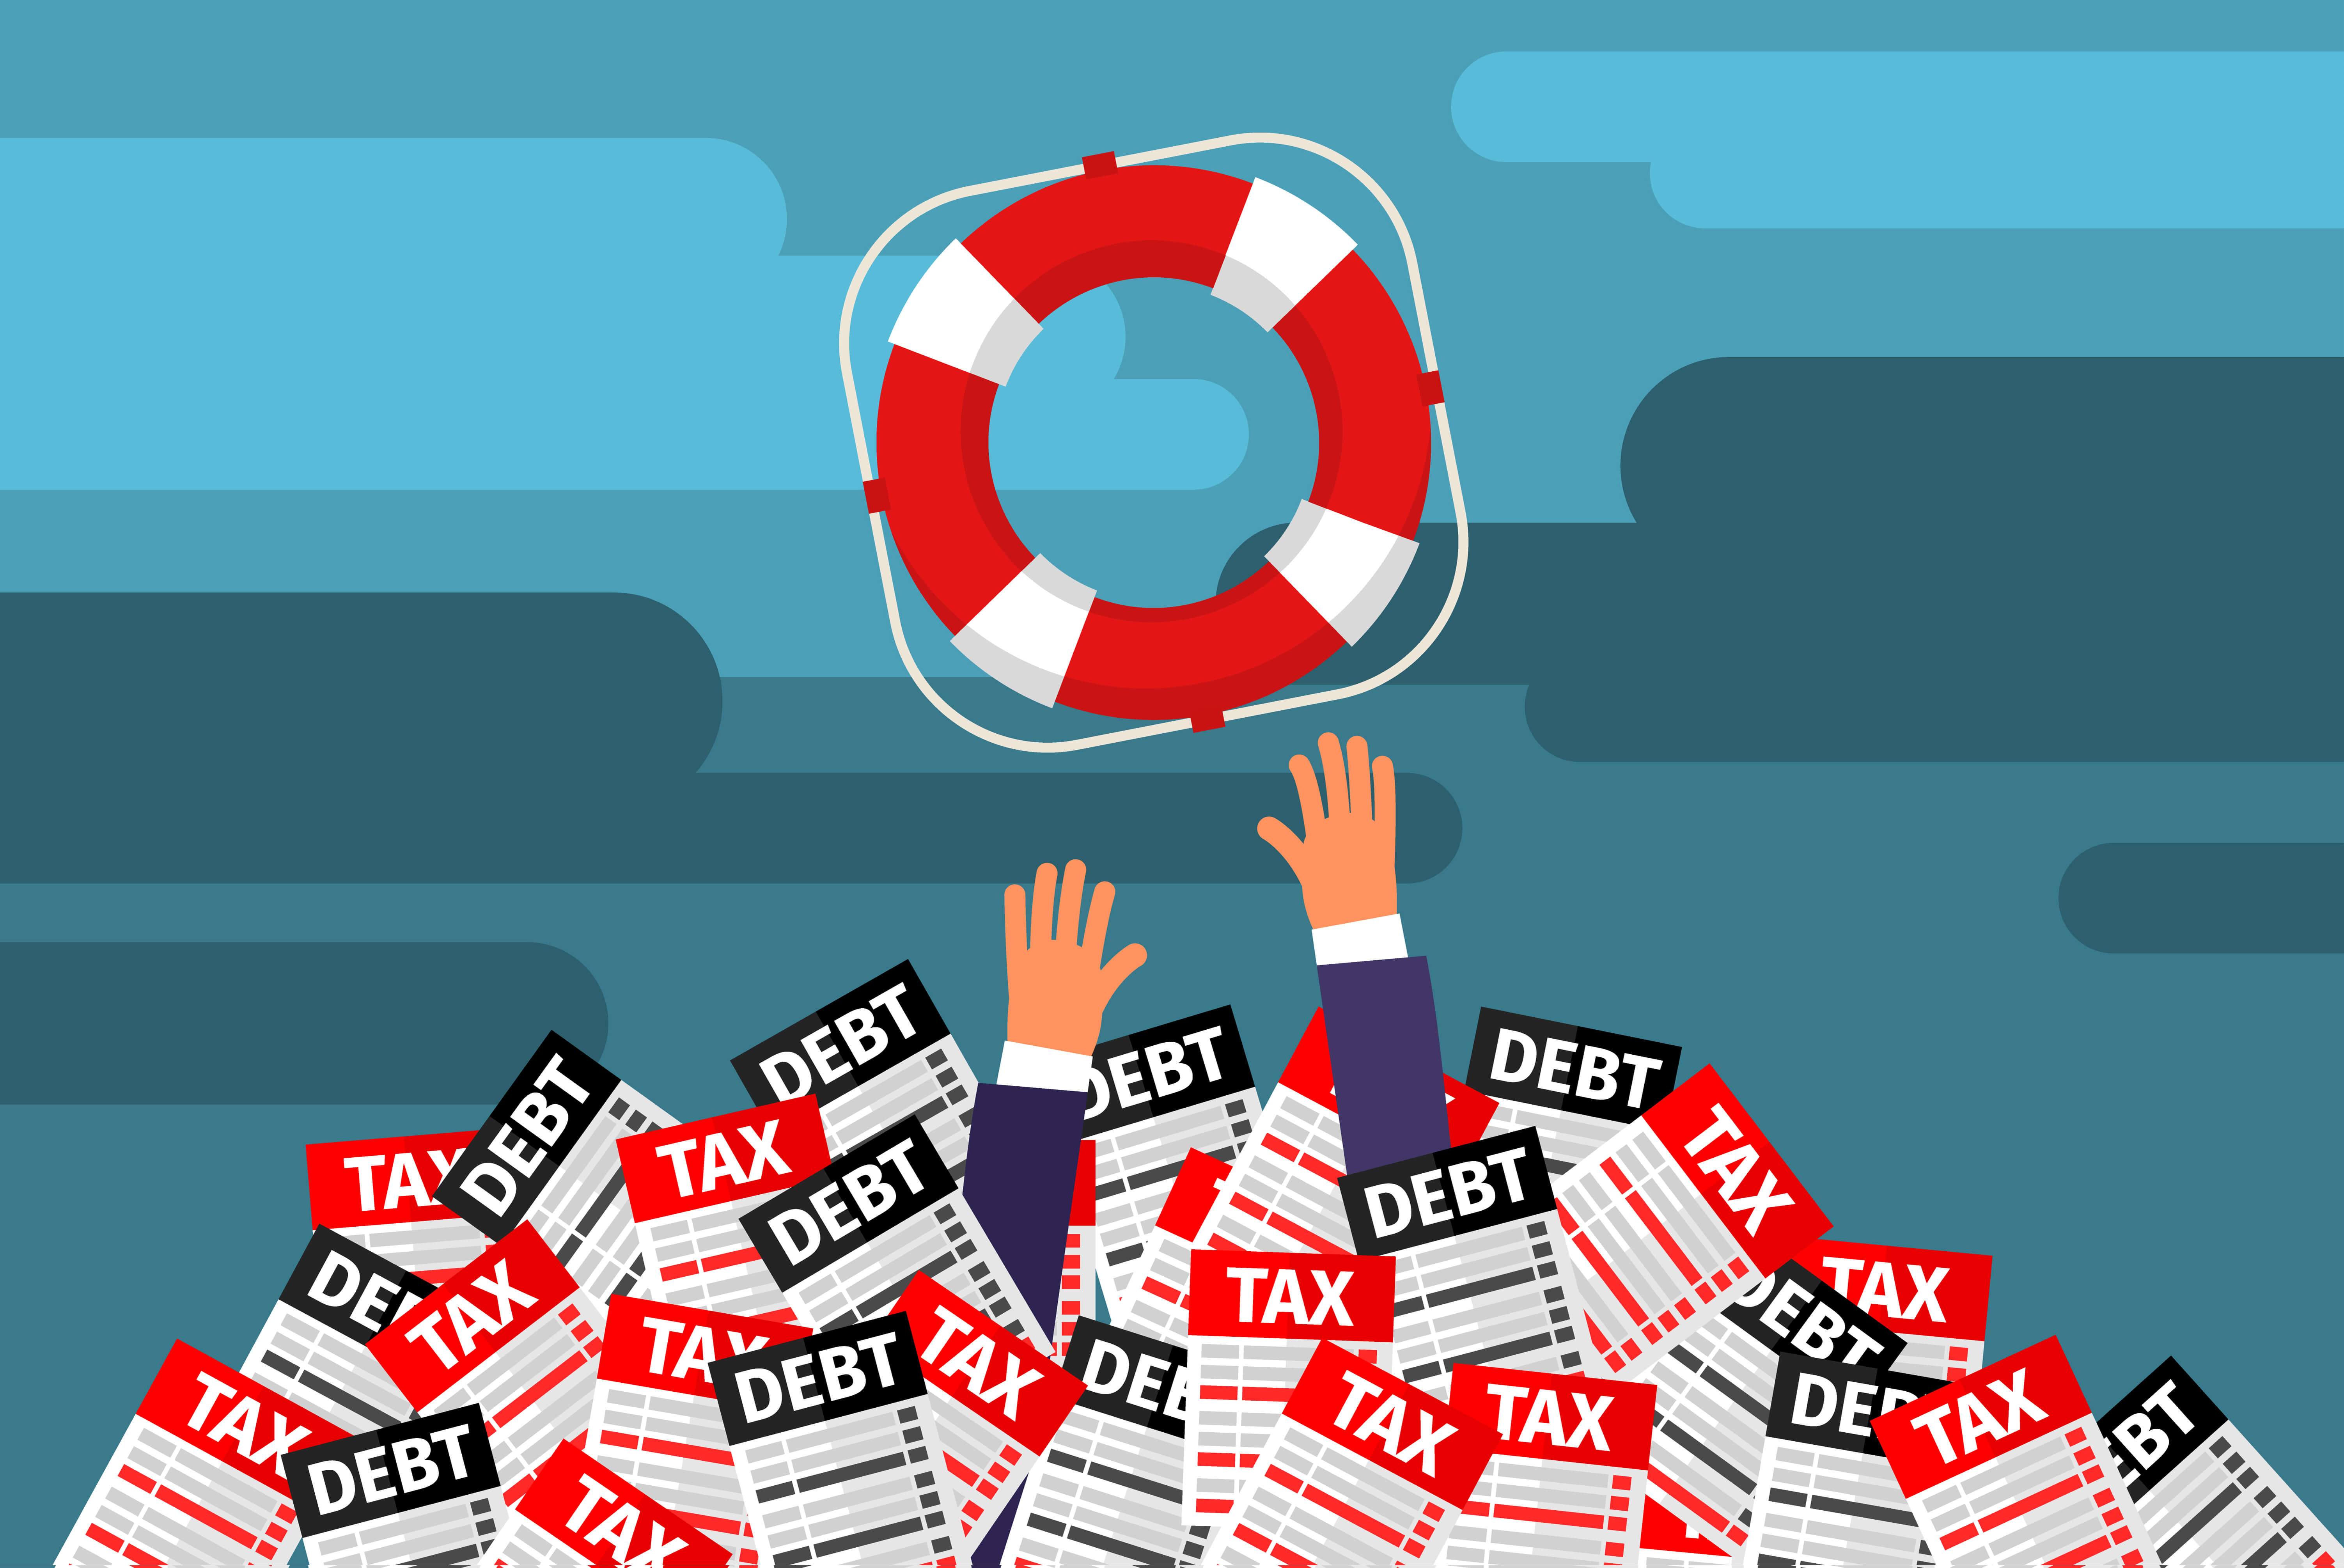 Learn How To Generate Tax Debt Relief Leads At Broker Calls